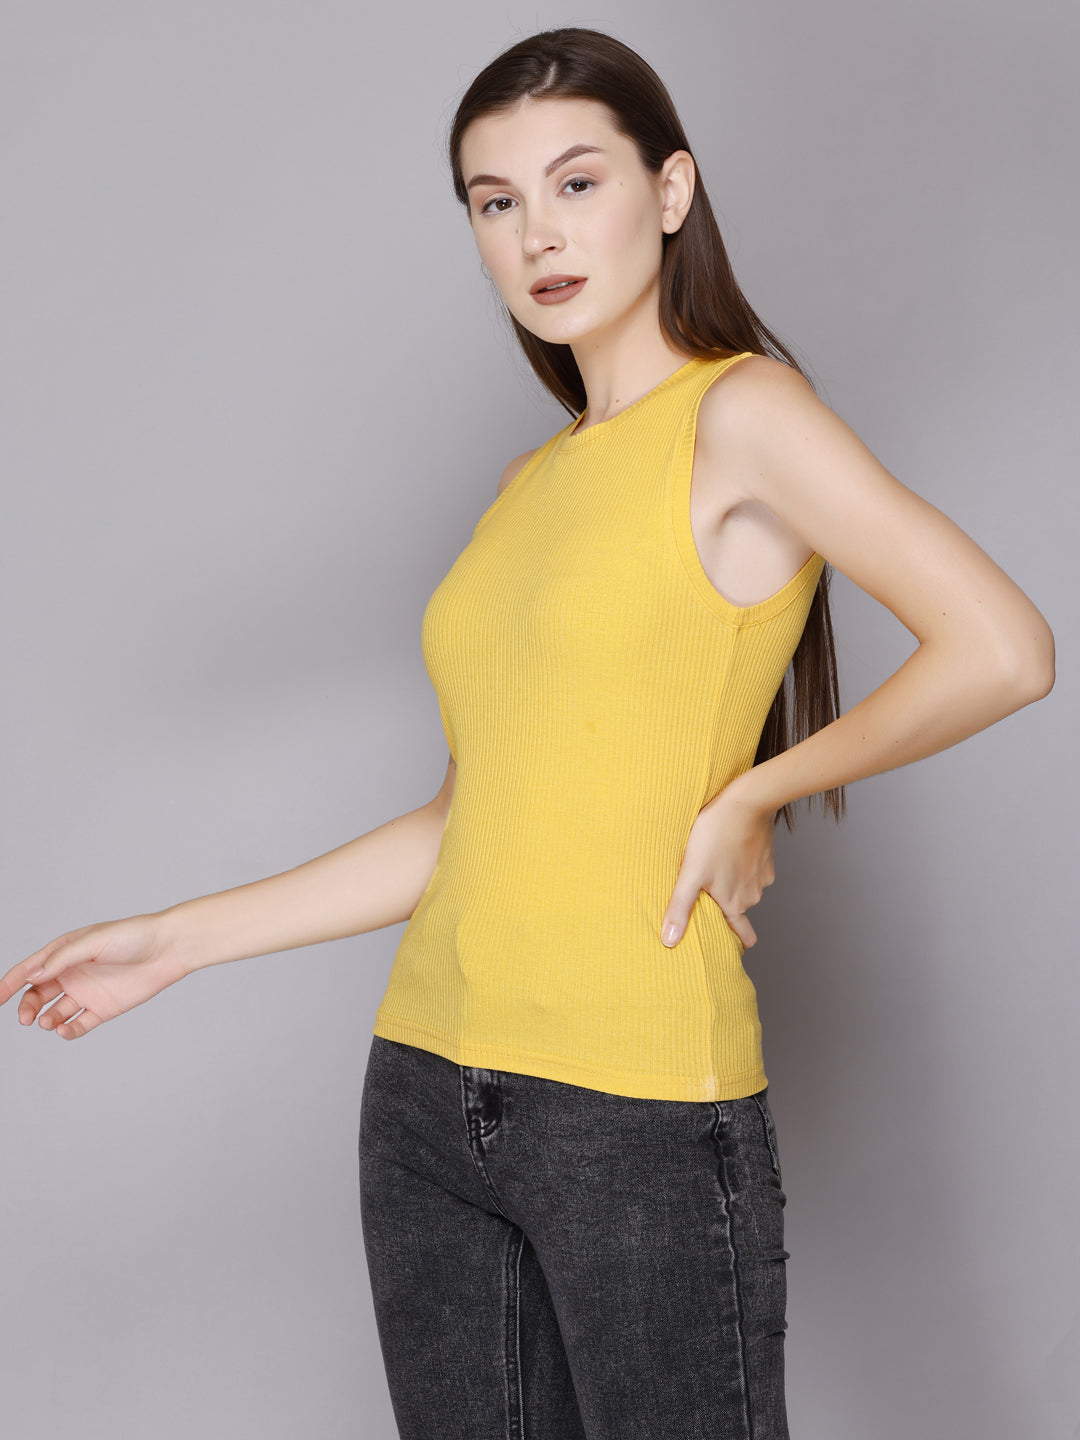 Stylish Modish Rib Tank Top For Women Online At Best Prices